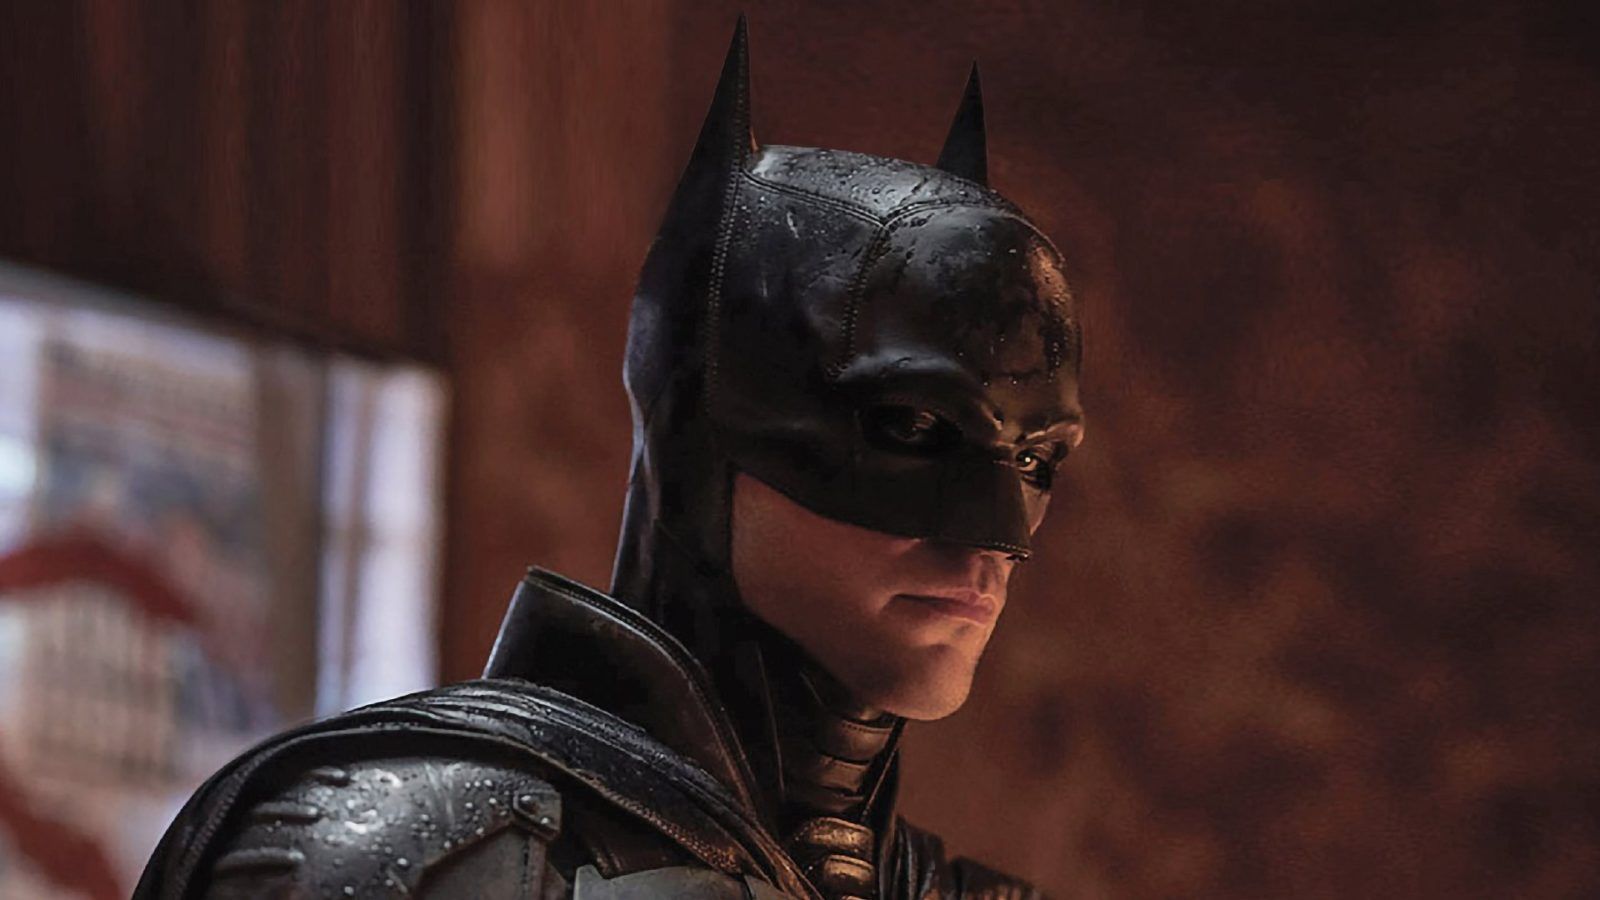 All Batman movies and shows to watch before 'The Batman' releases